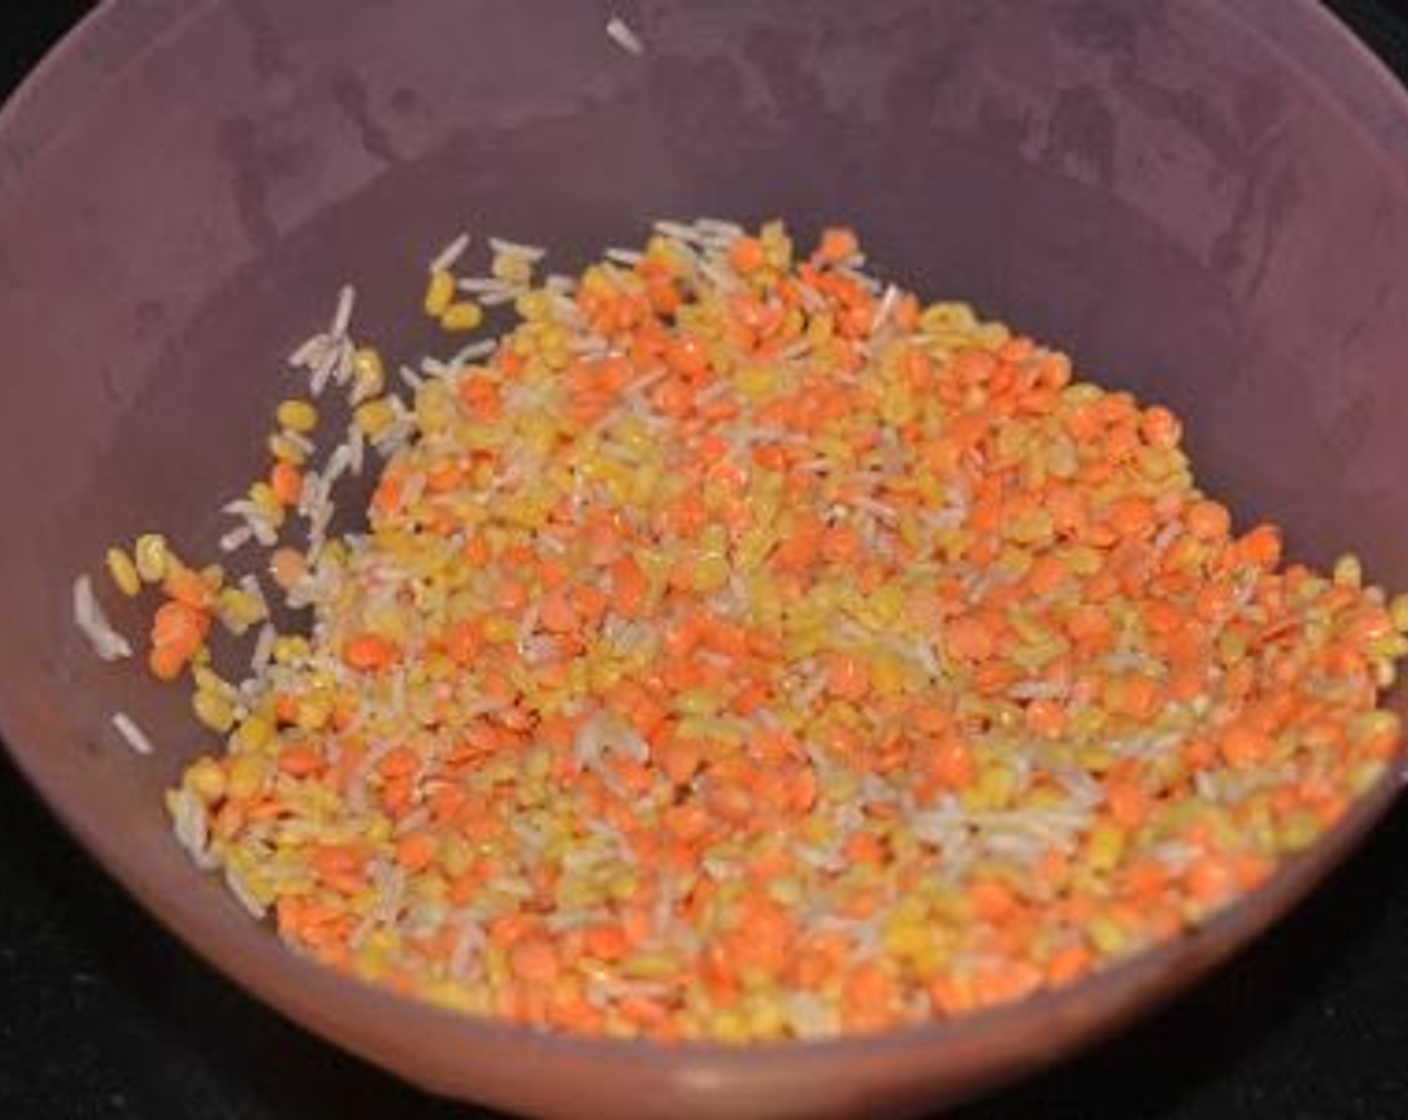 step 1 Wash and rinse Mung Beans (1 cup), Red Lentils (1 cup), and White Rice (1 cup) together. Soak for 15 minutes in water, then drain and keep aside.